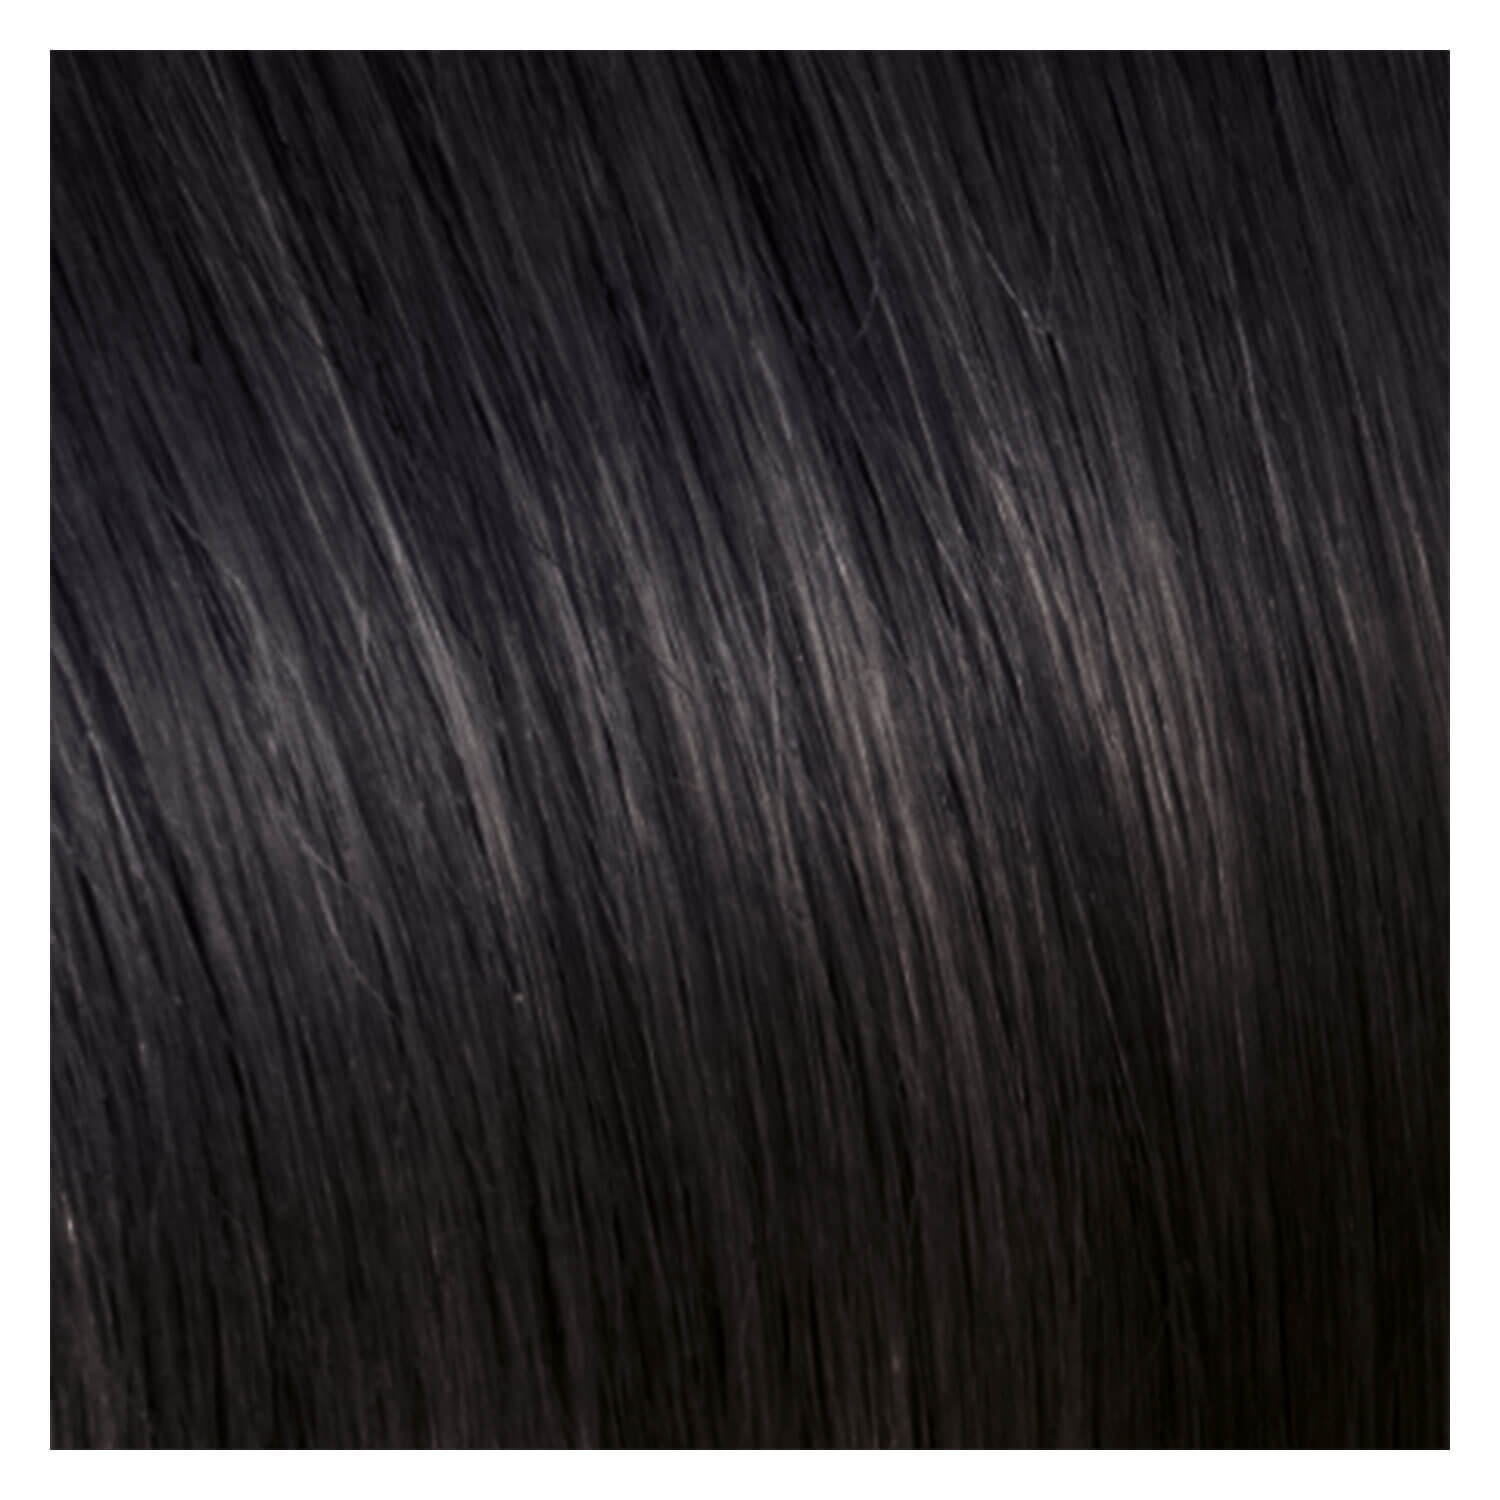 Product image from SHE Clip In-System Hair Extensions - 9-teiliges Set 2 Dunkles Kastanienbraun 50/55cm